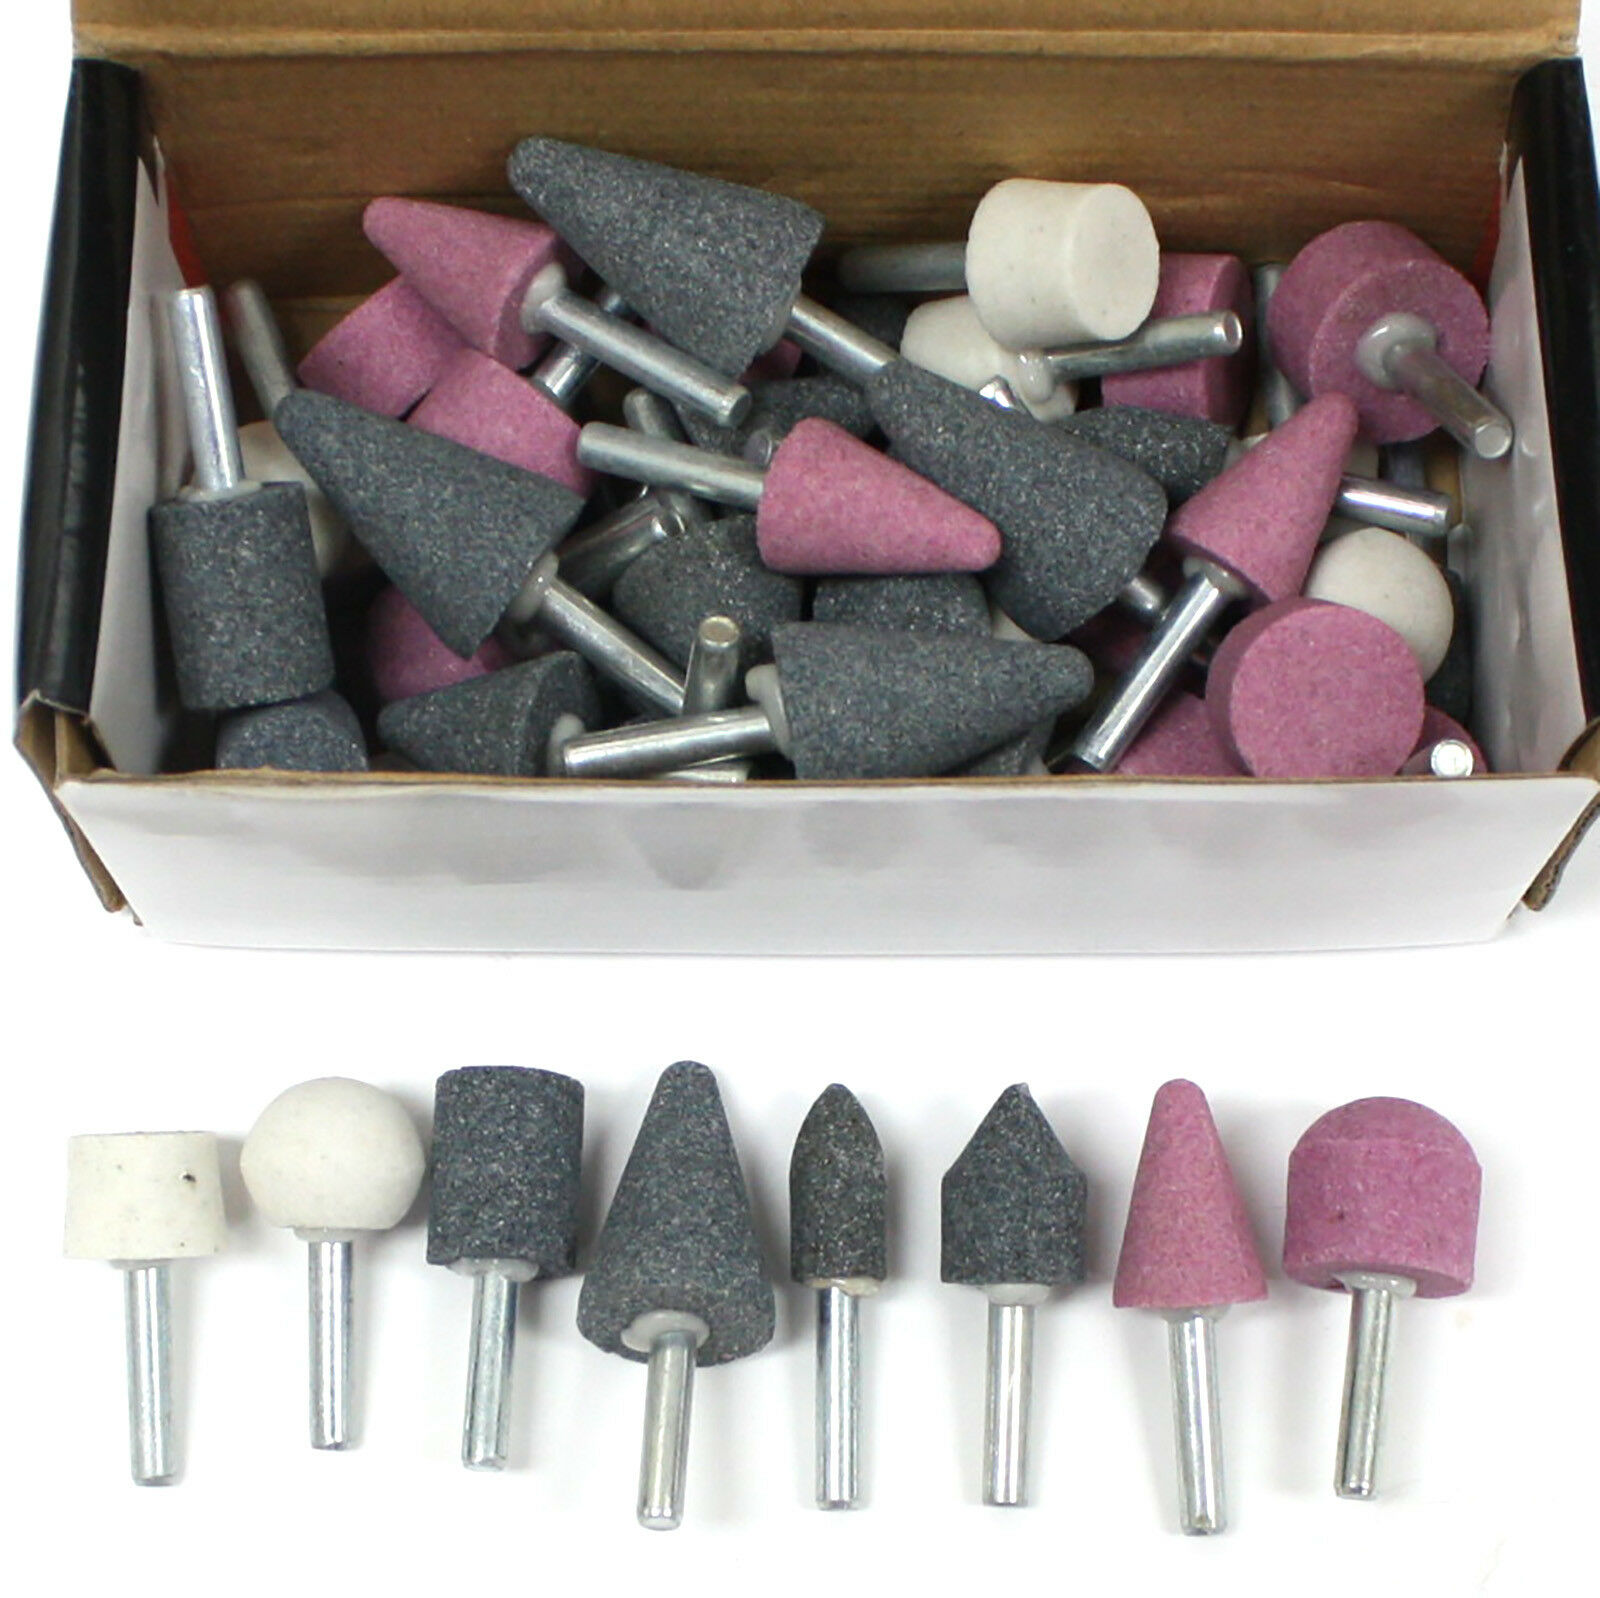 1 Setper Pack Eazypower 87149 50Piece Assorted Abrasive Mounted Points or Stones, 